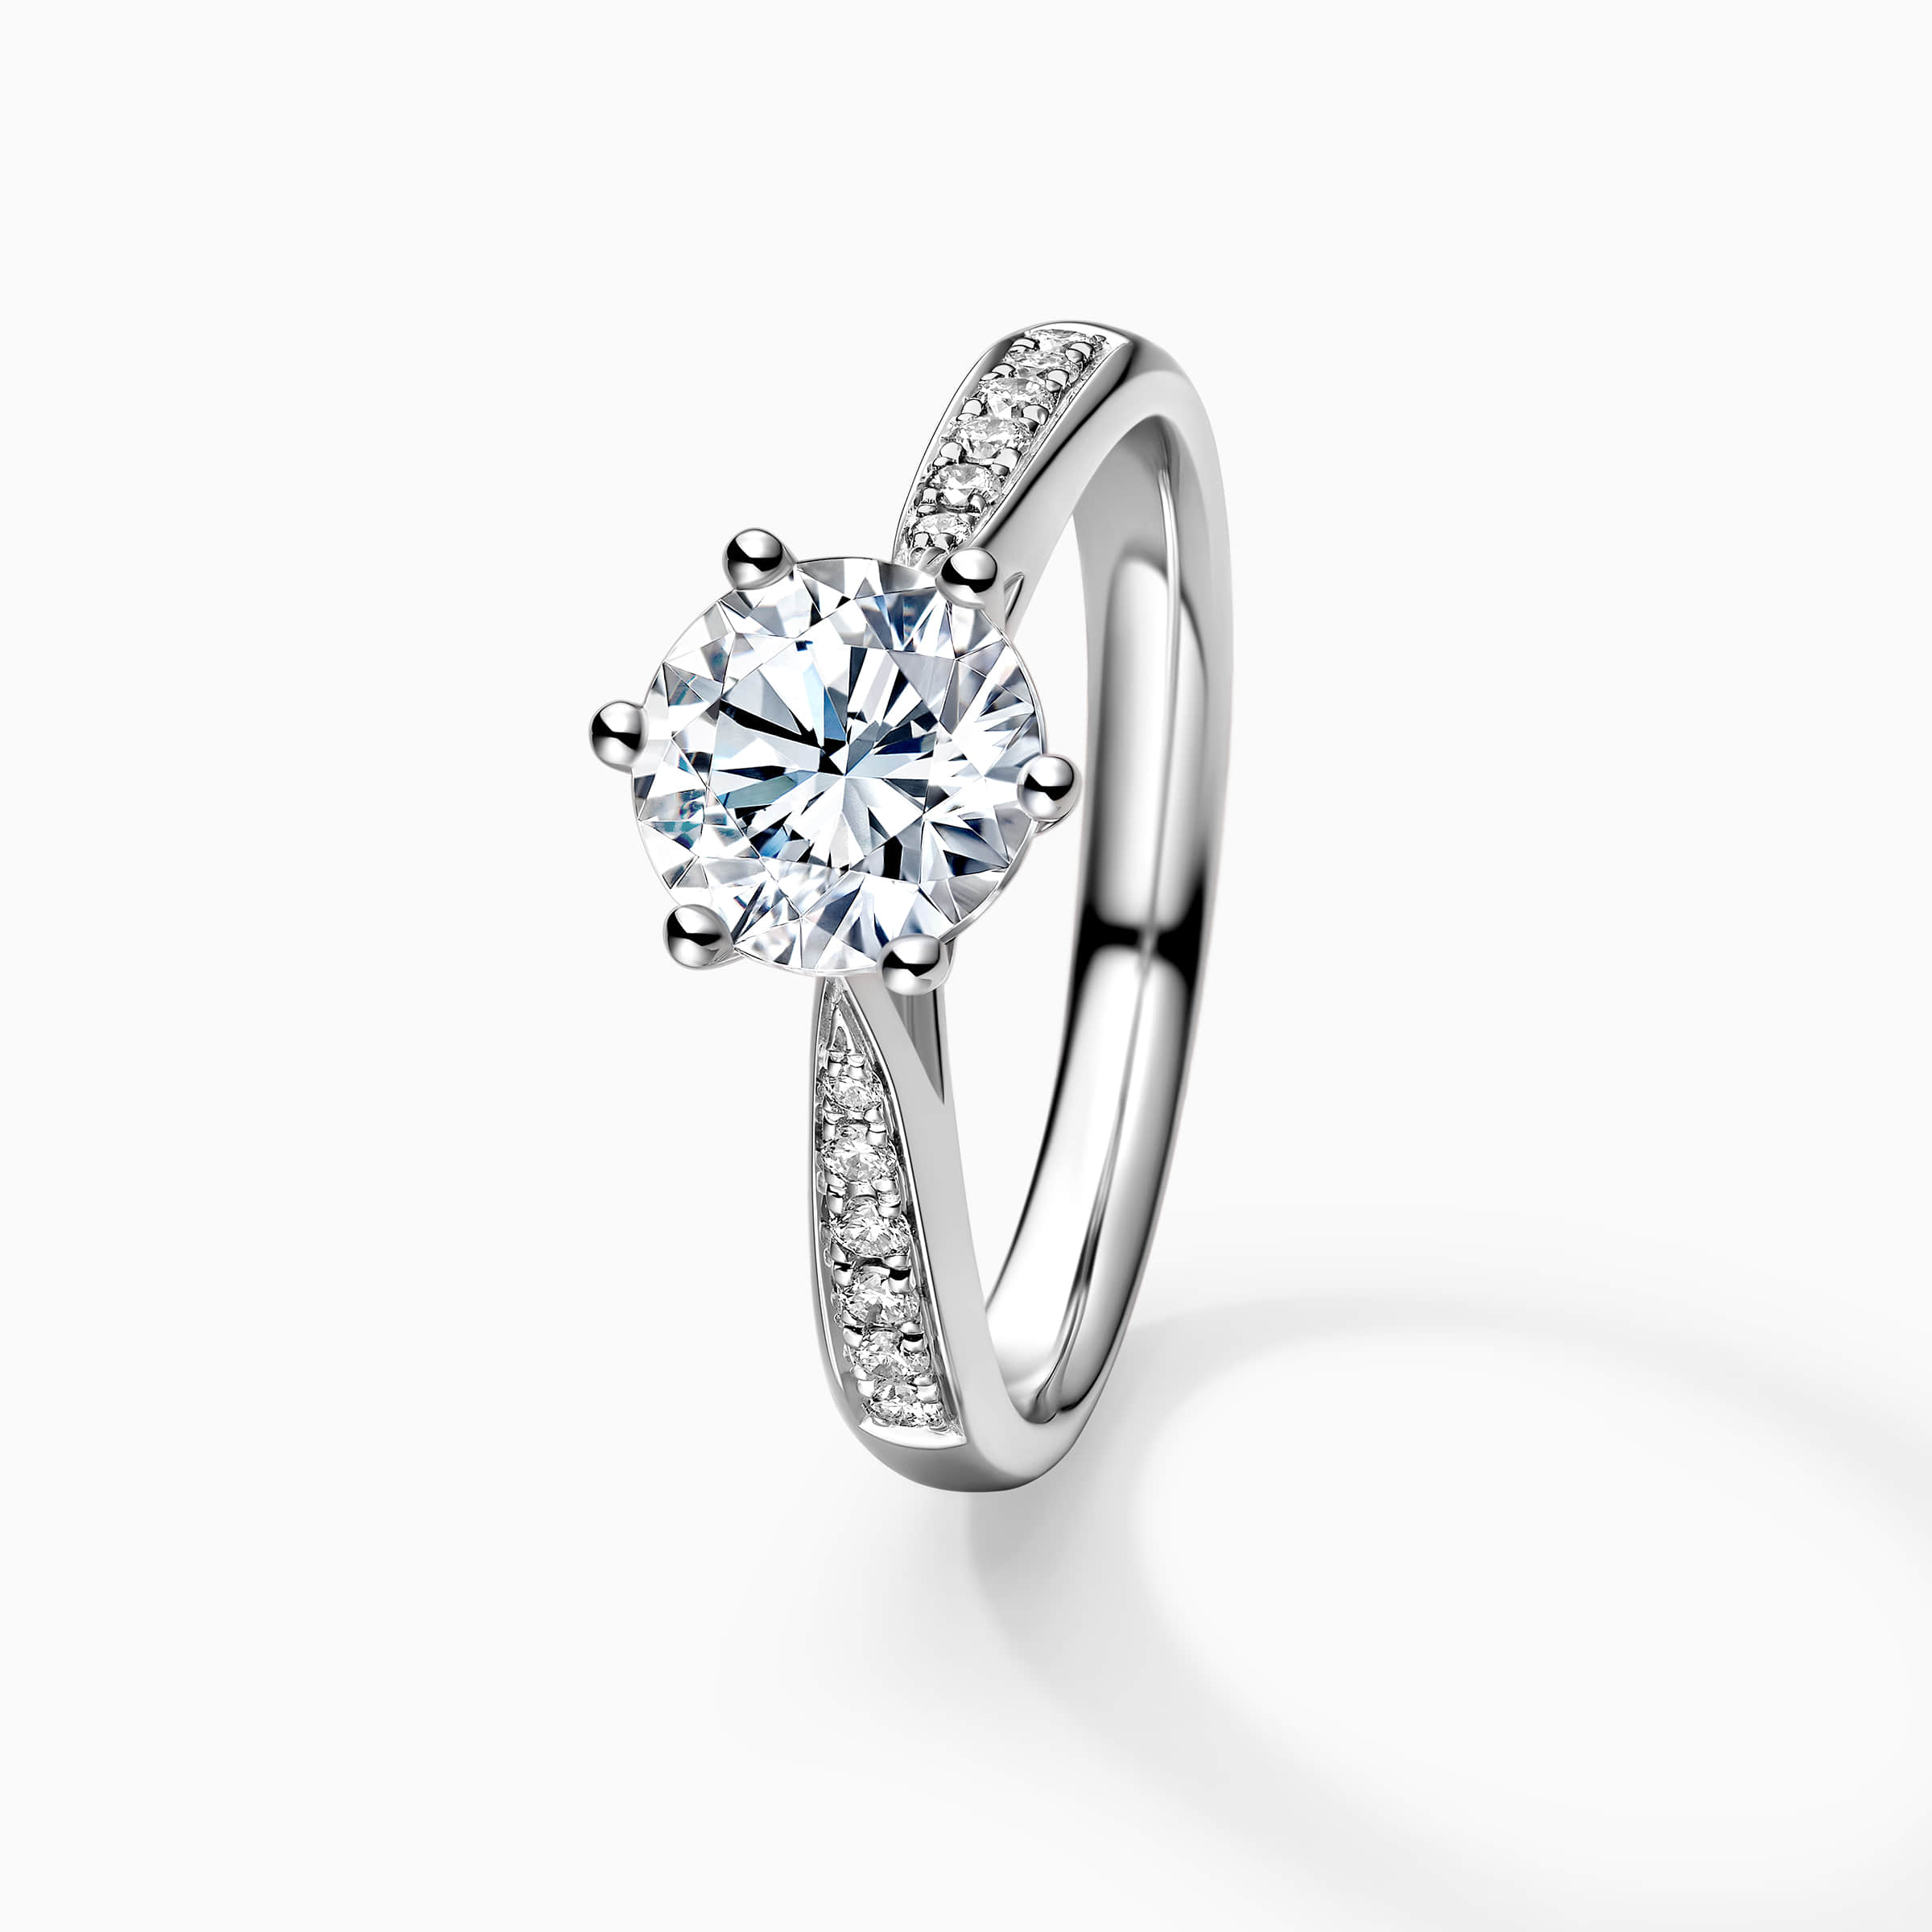 darry ring 6 prong engagement ring top view